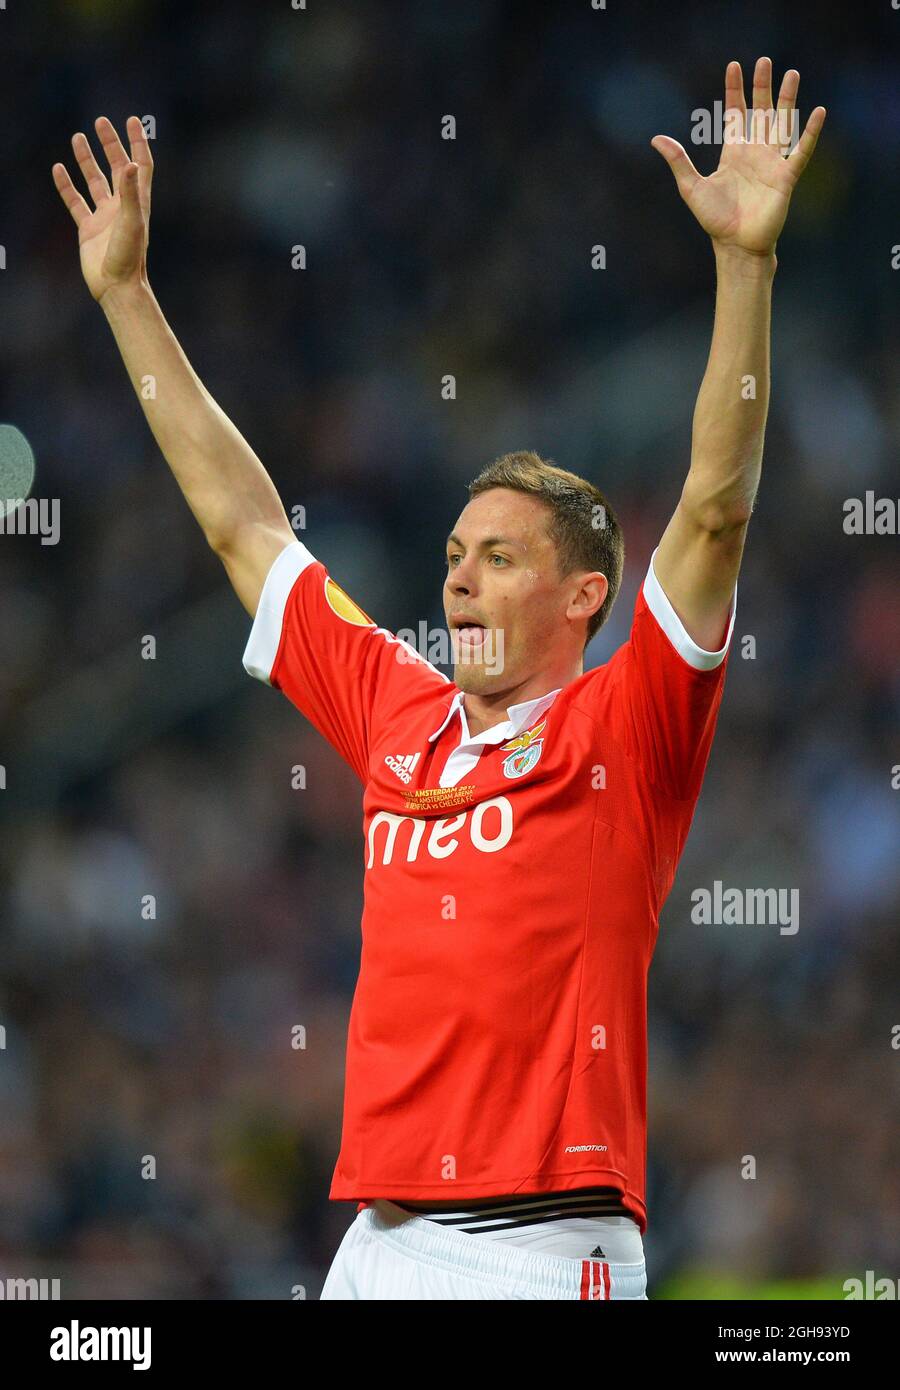 Nemanja Matic of SL Benfica during the UEFA Europa League Final match  between Benfica and Chelsea at the Amsterdam Arena in Amsterdam,  Netherlands on May 15, 2013. Picture Simon Bellis Stock Photo - Alamy